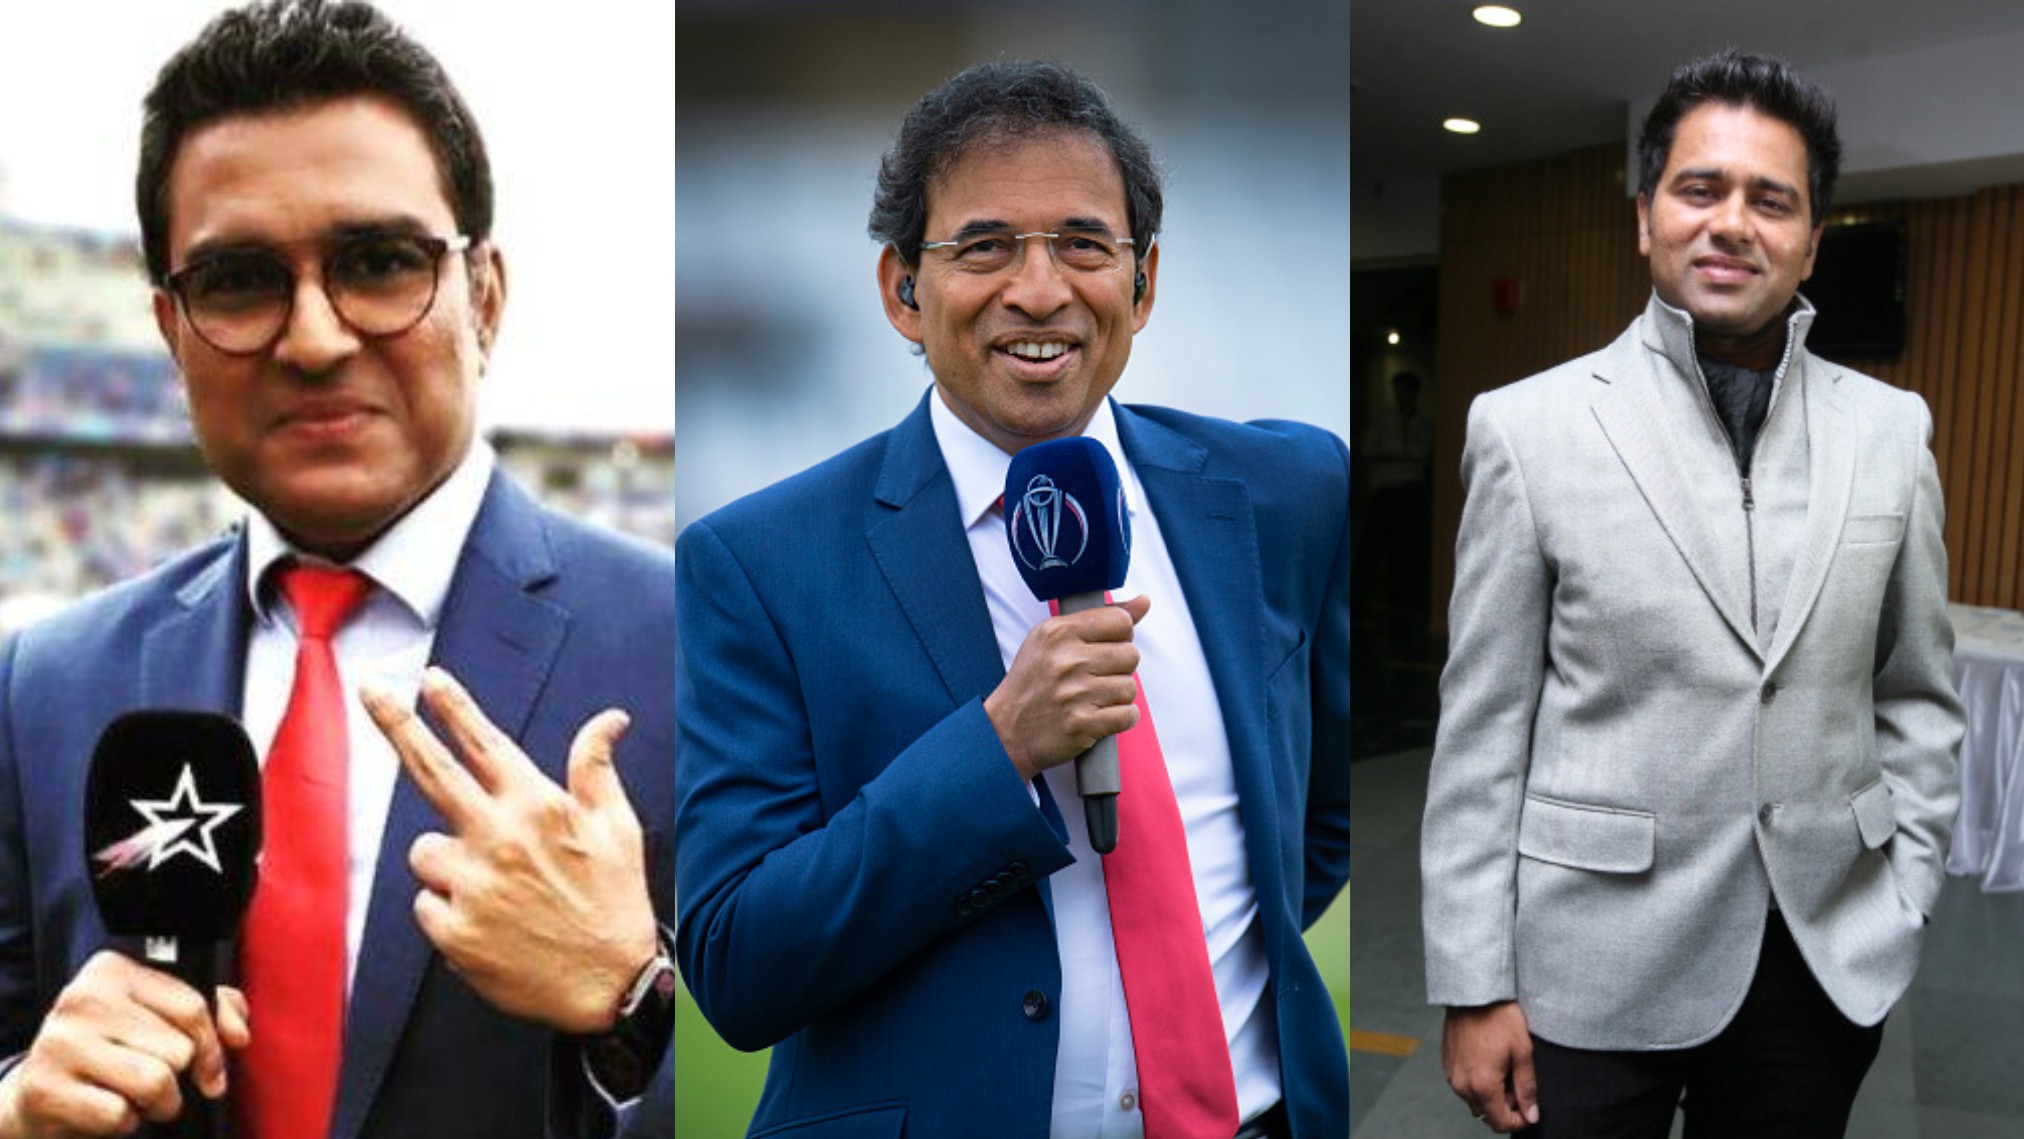 AUS v IND 2020-21: Manjrekar, Bhogle and Chopra react to India’s playing XI for Adelaide D/N Test